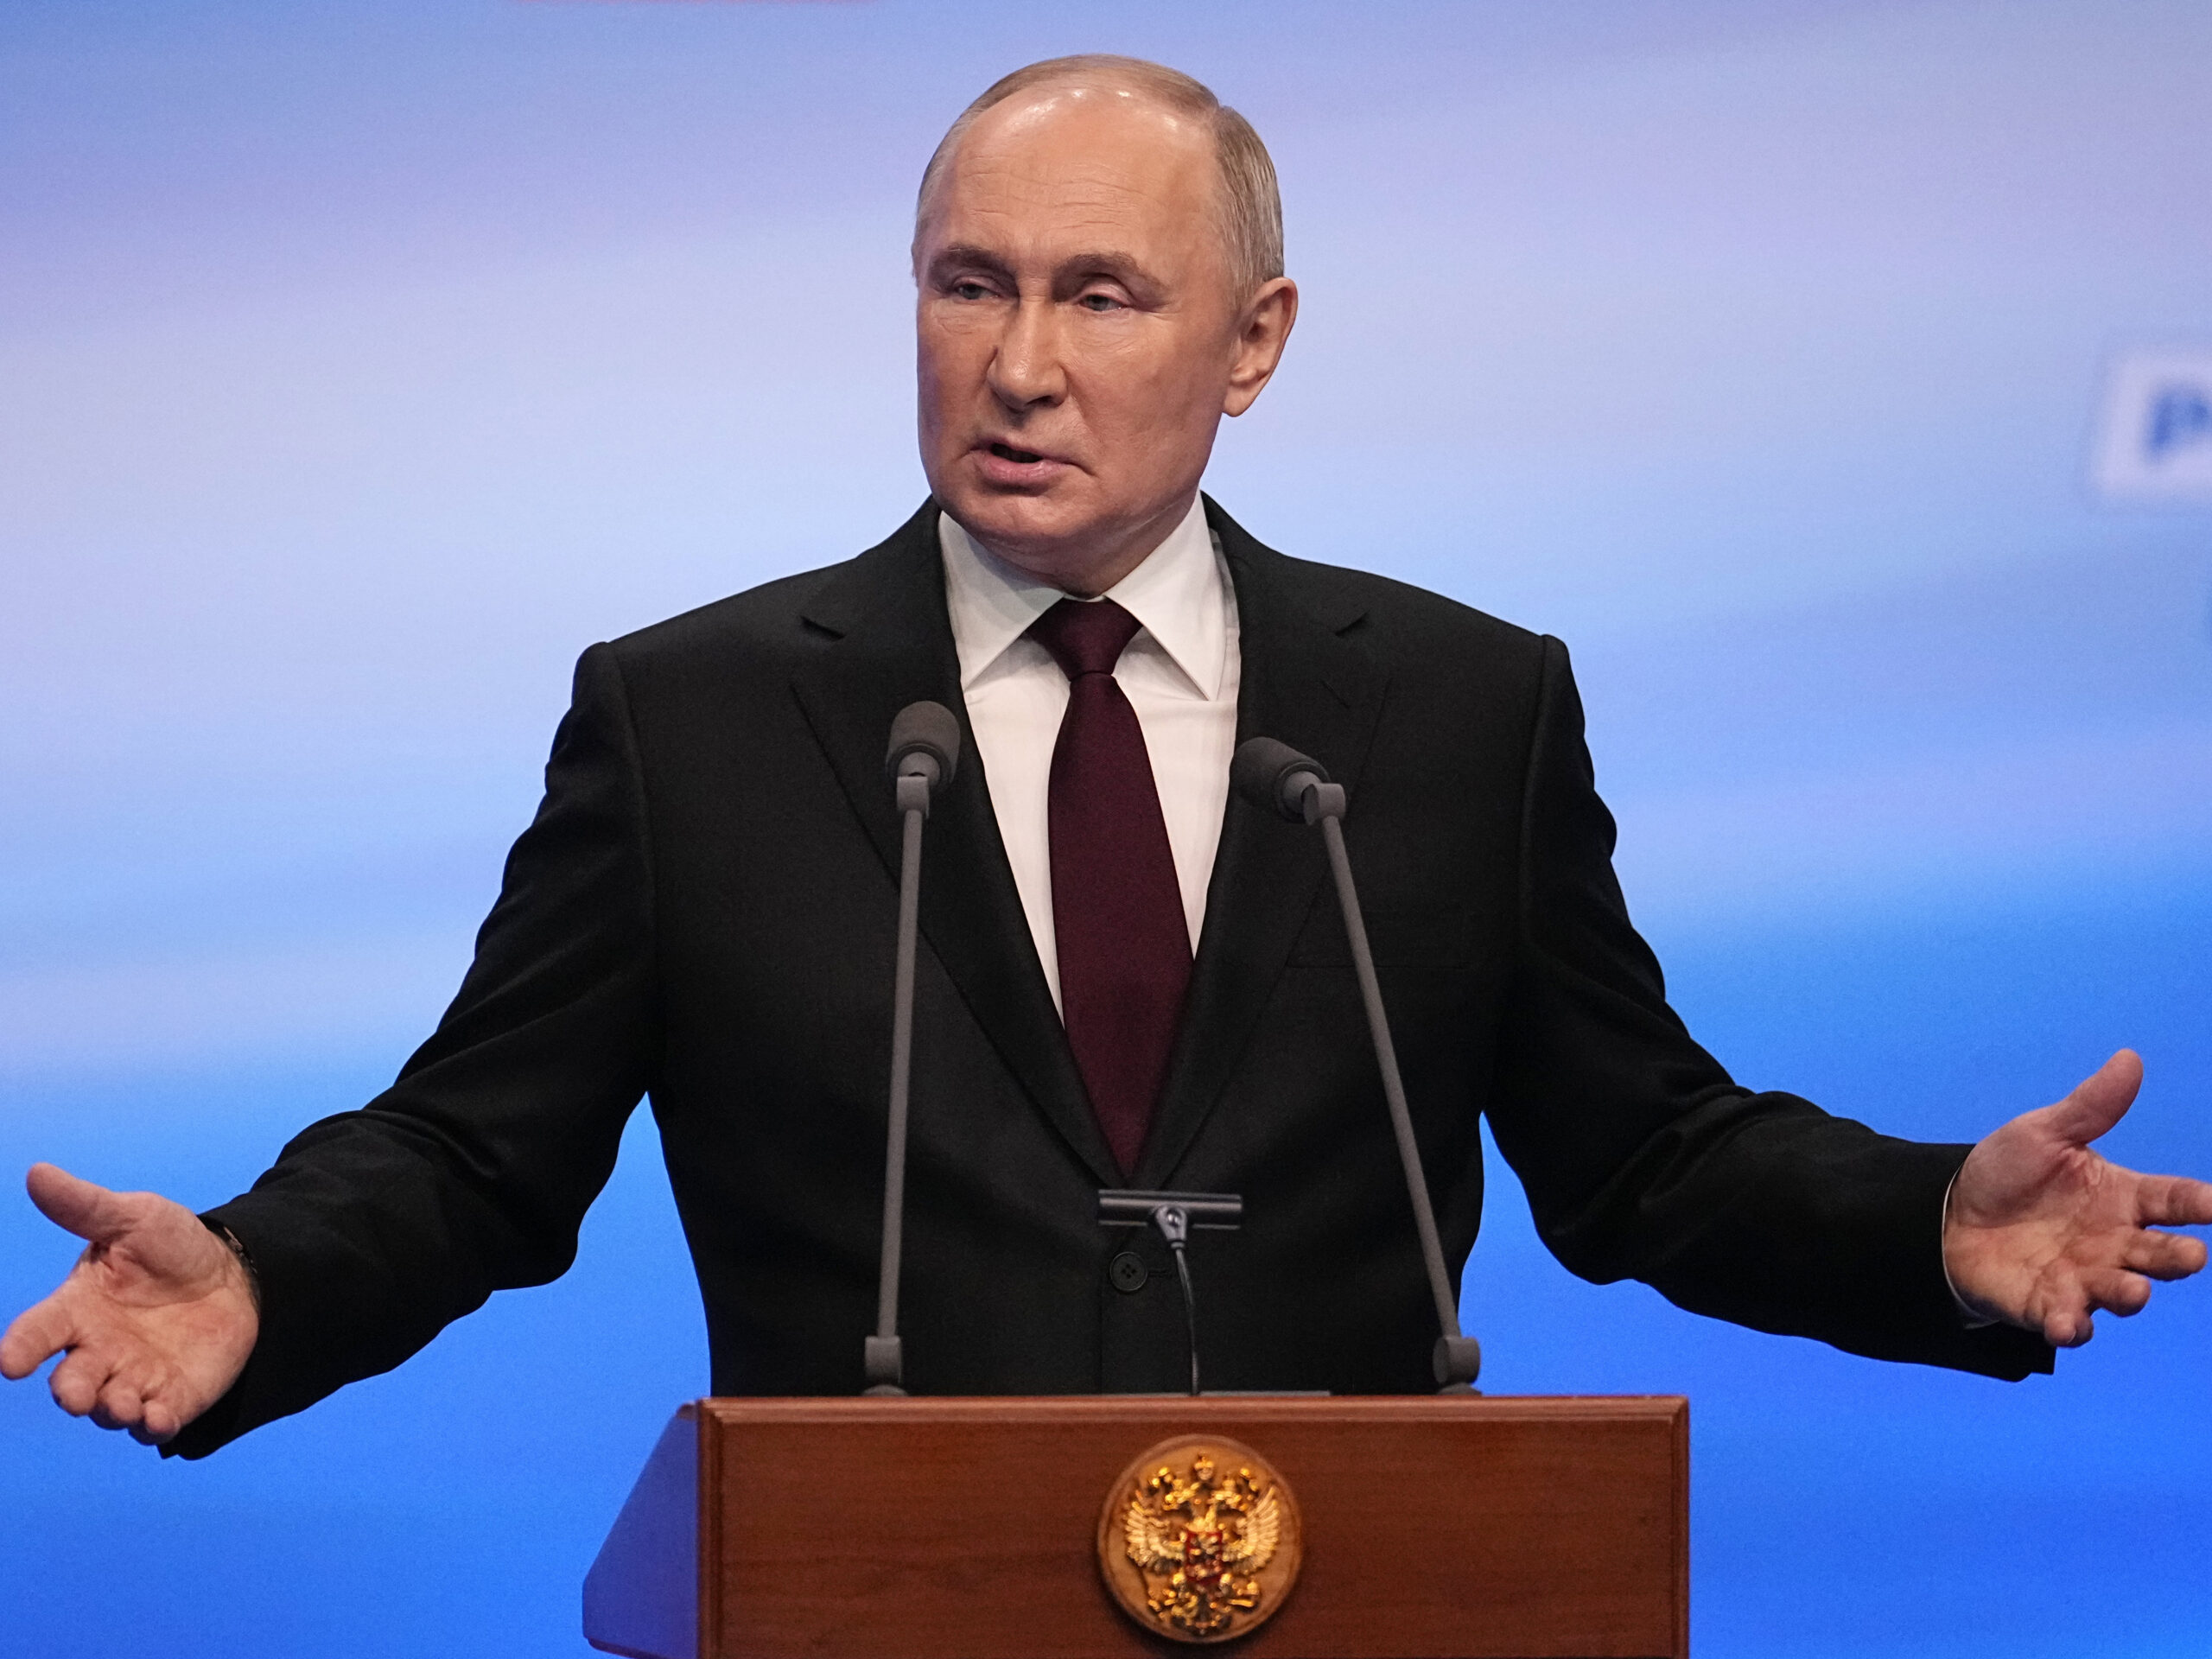 Putin wins Russian election; Supreme Court tackles misinformation, censorship case